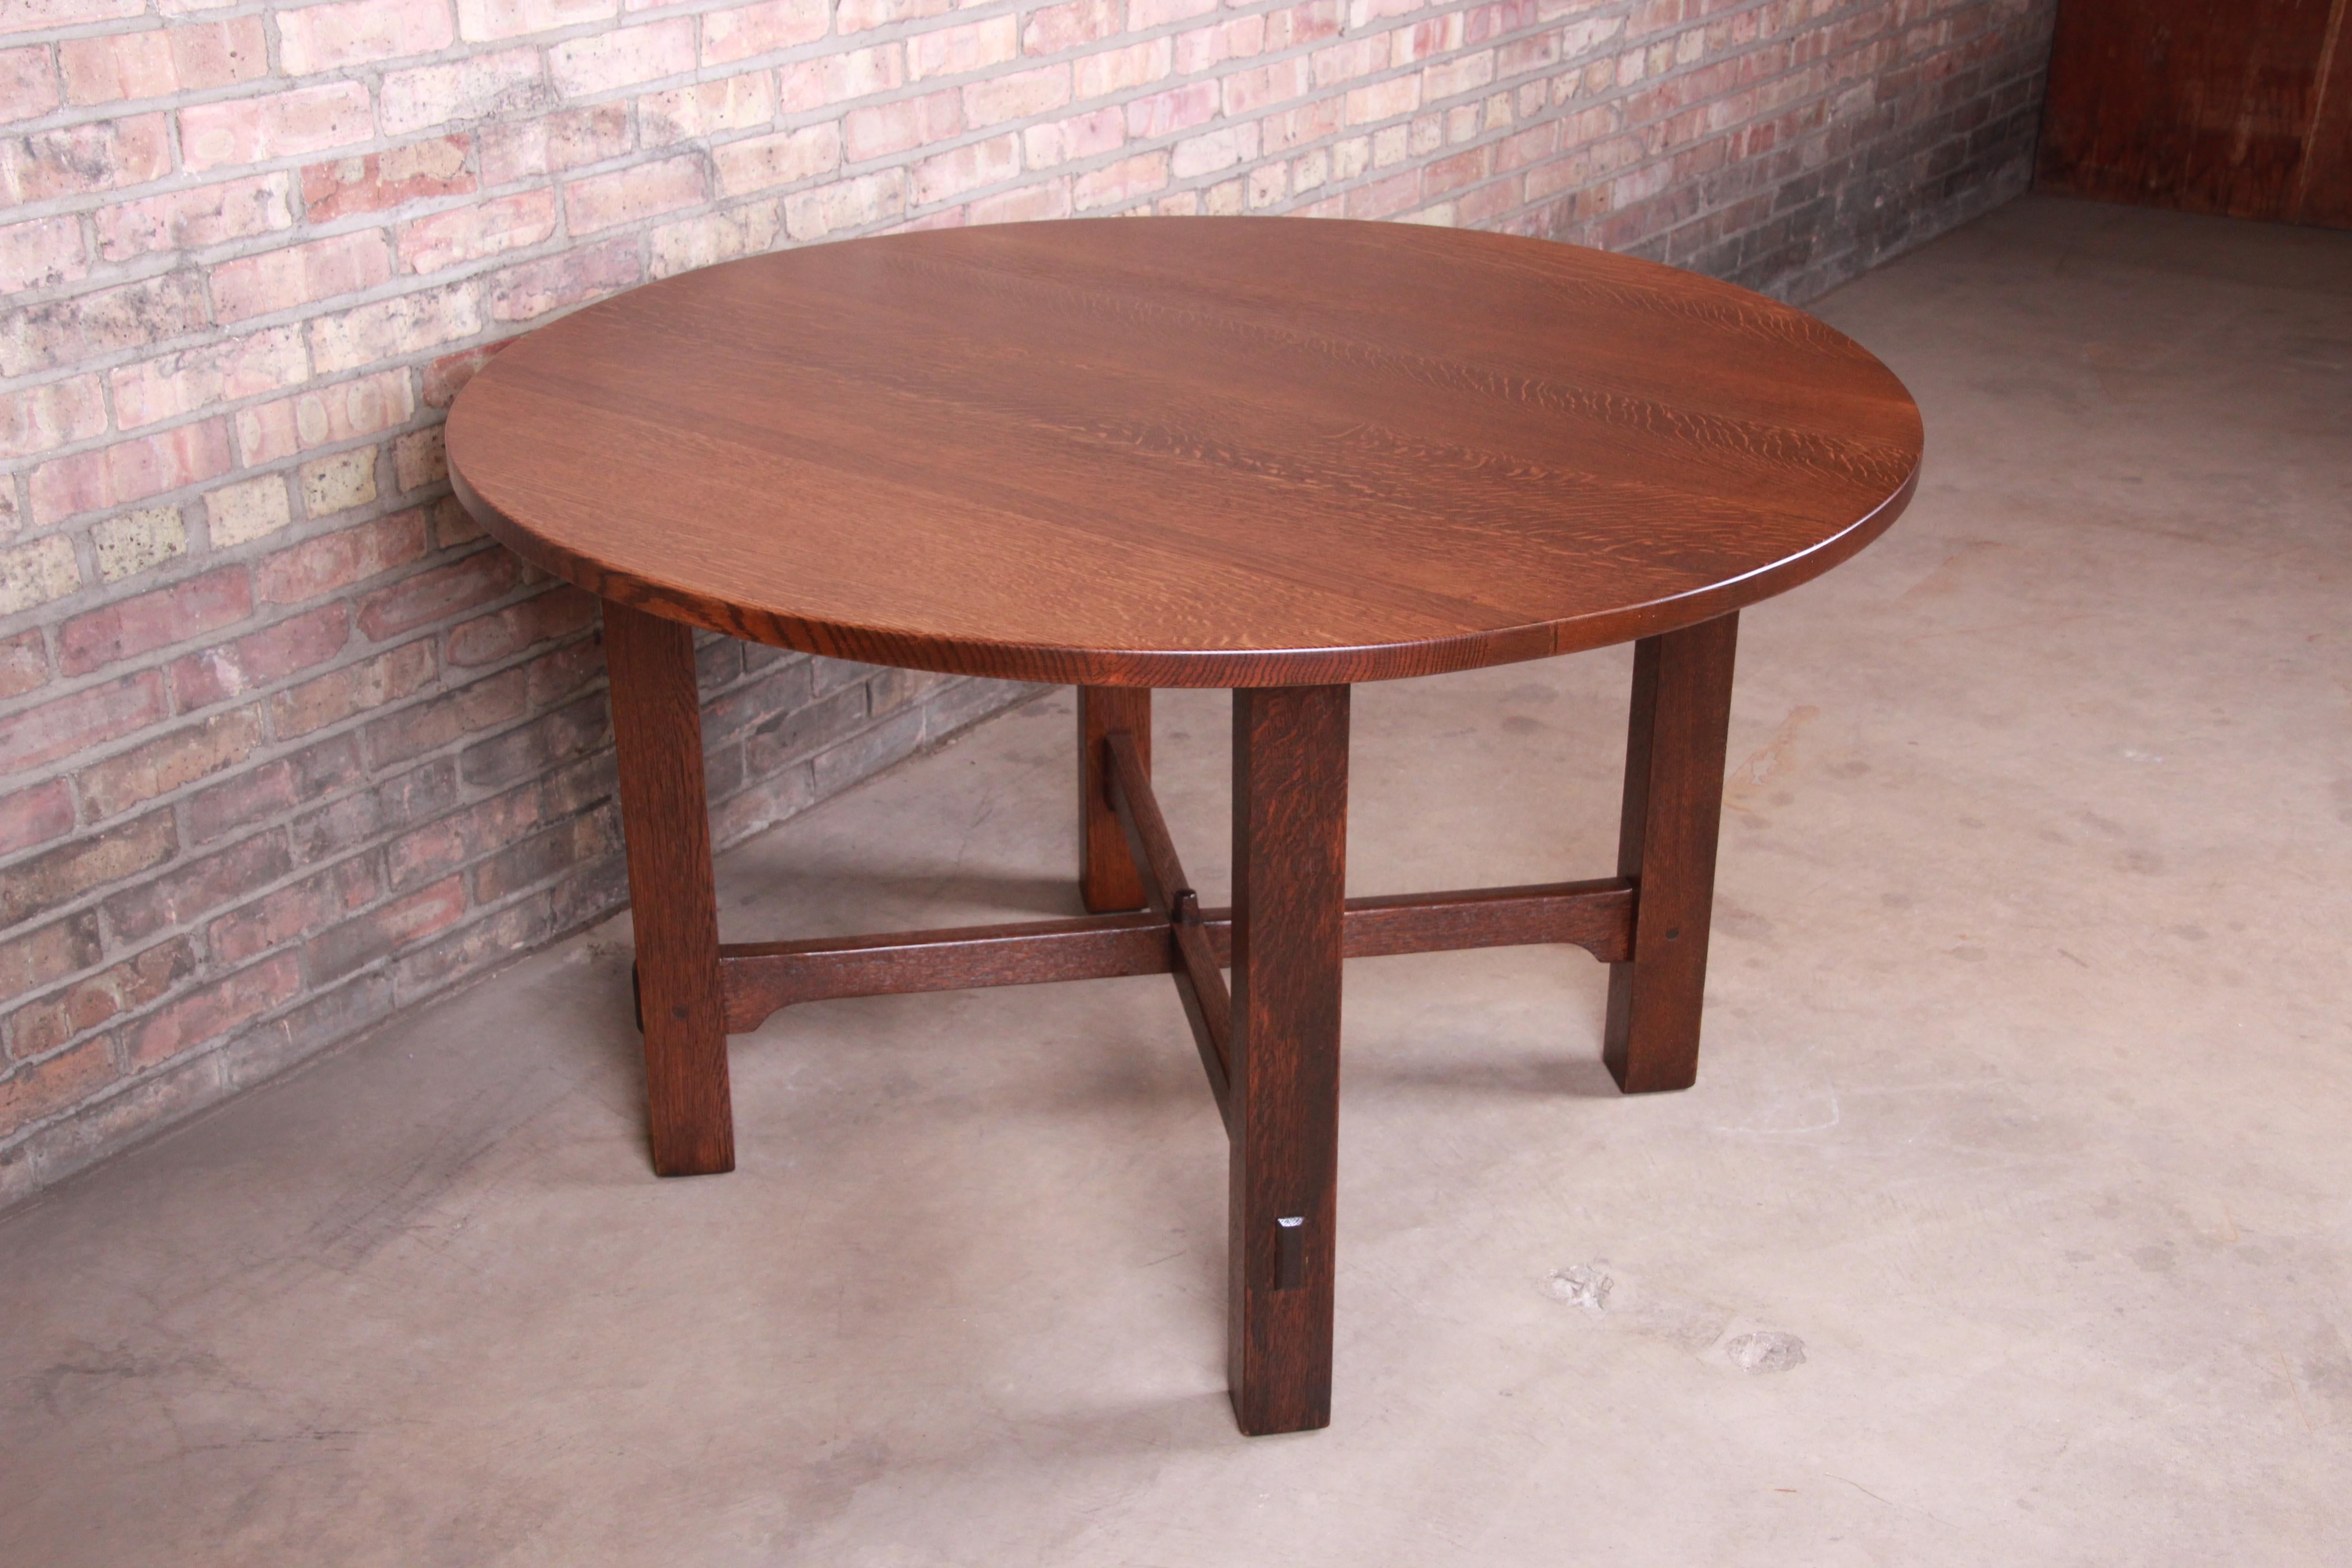 A rare and exceptional mission Arts & Crafts quarter sawn oak round dining or center table

By Gustav Stickley (original branded label)

Eastwood, NY, circa 1900

Measures: 49.75